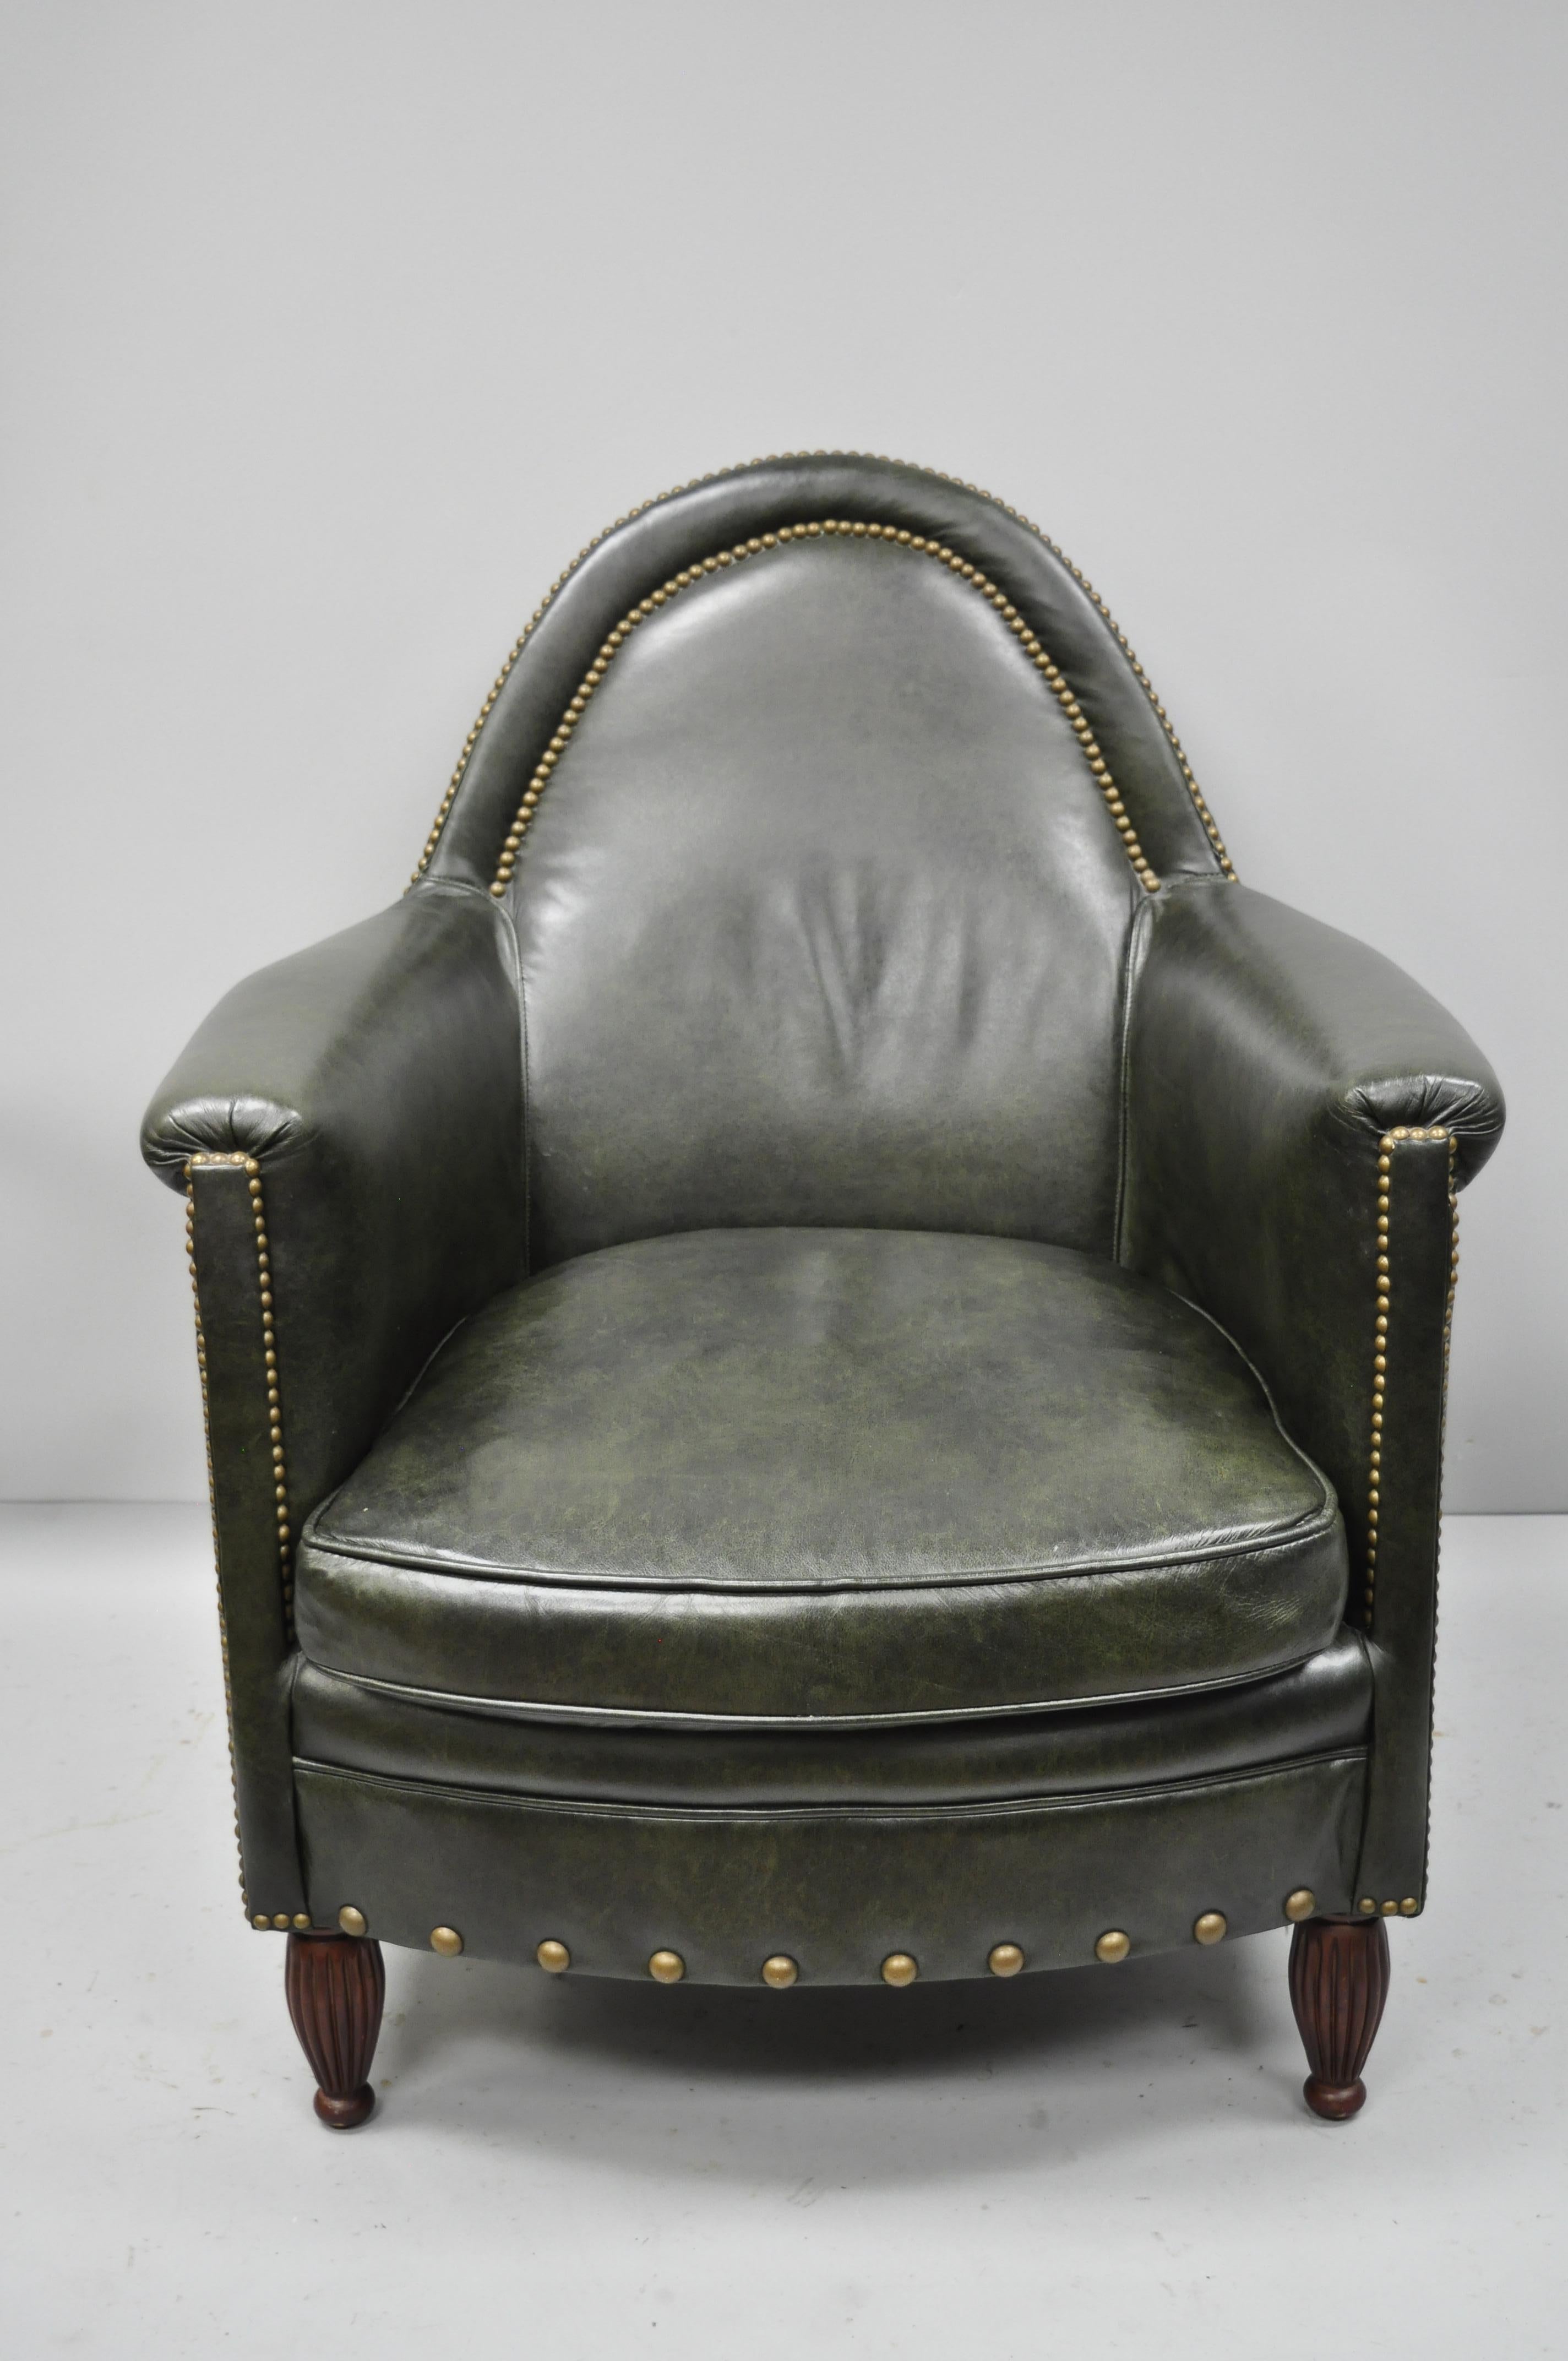 Green leather lounge club chair armchair and ottoman by Bradington Young. Items feature nailhead trim, tapered wooden legs, unique oval shape, original label, and quality American craftsmanship, circa late 20th century. Measurements: 38.5